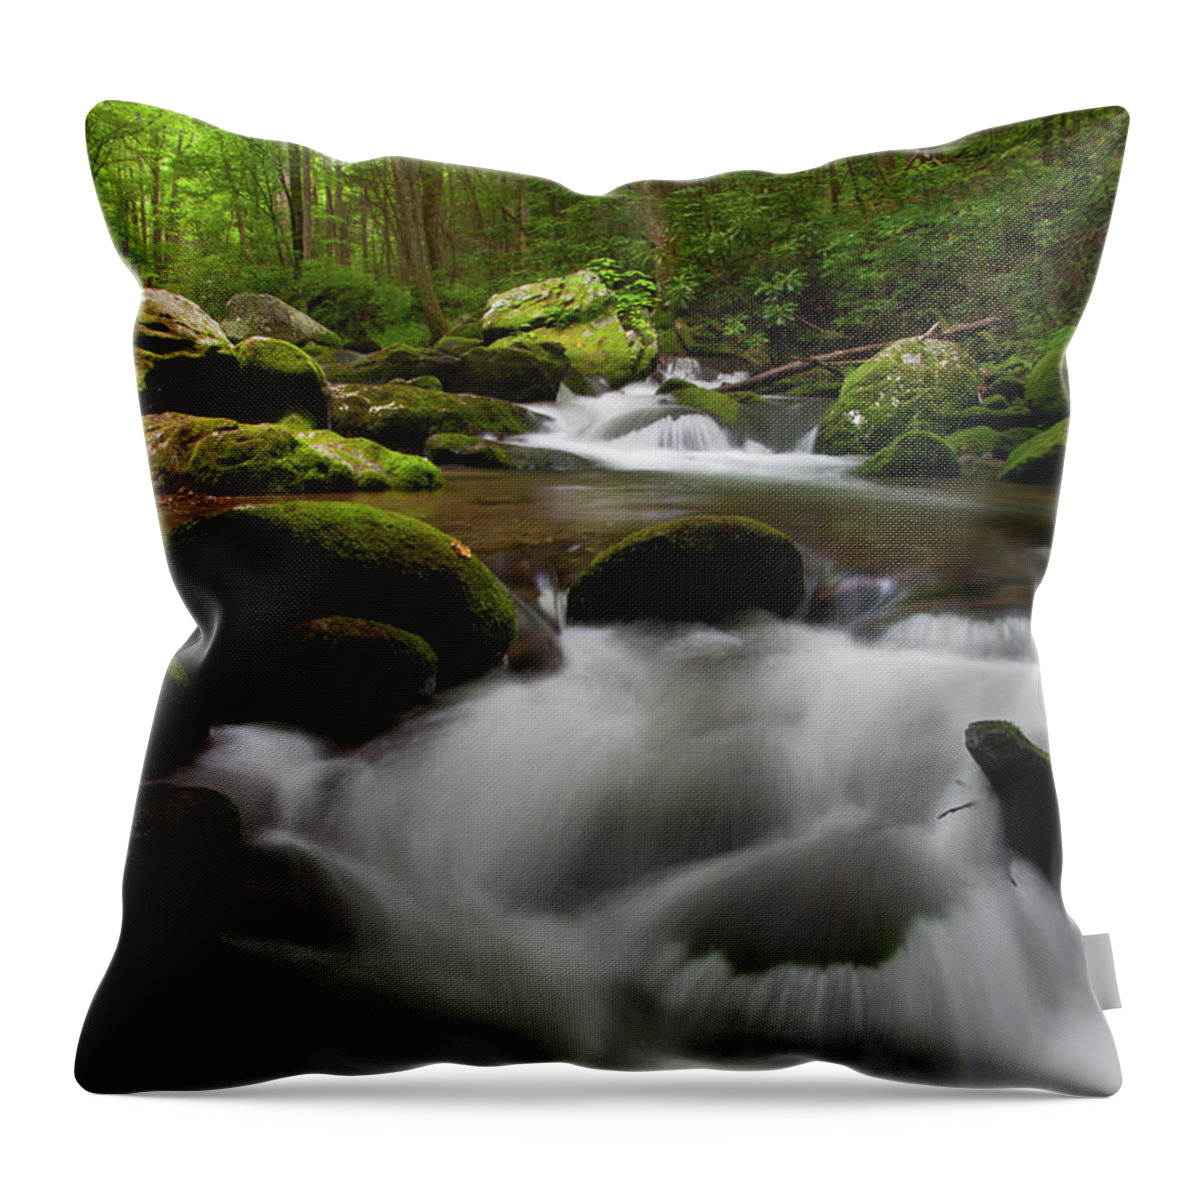 Southern Usa Throw Pillow featuring the photograph Into The Light by W. Drew Senter, Longleaf Photography